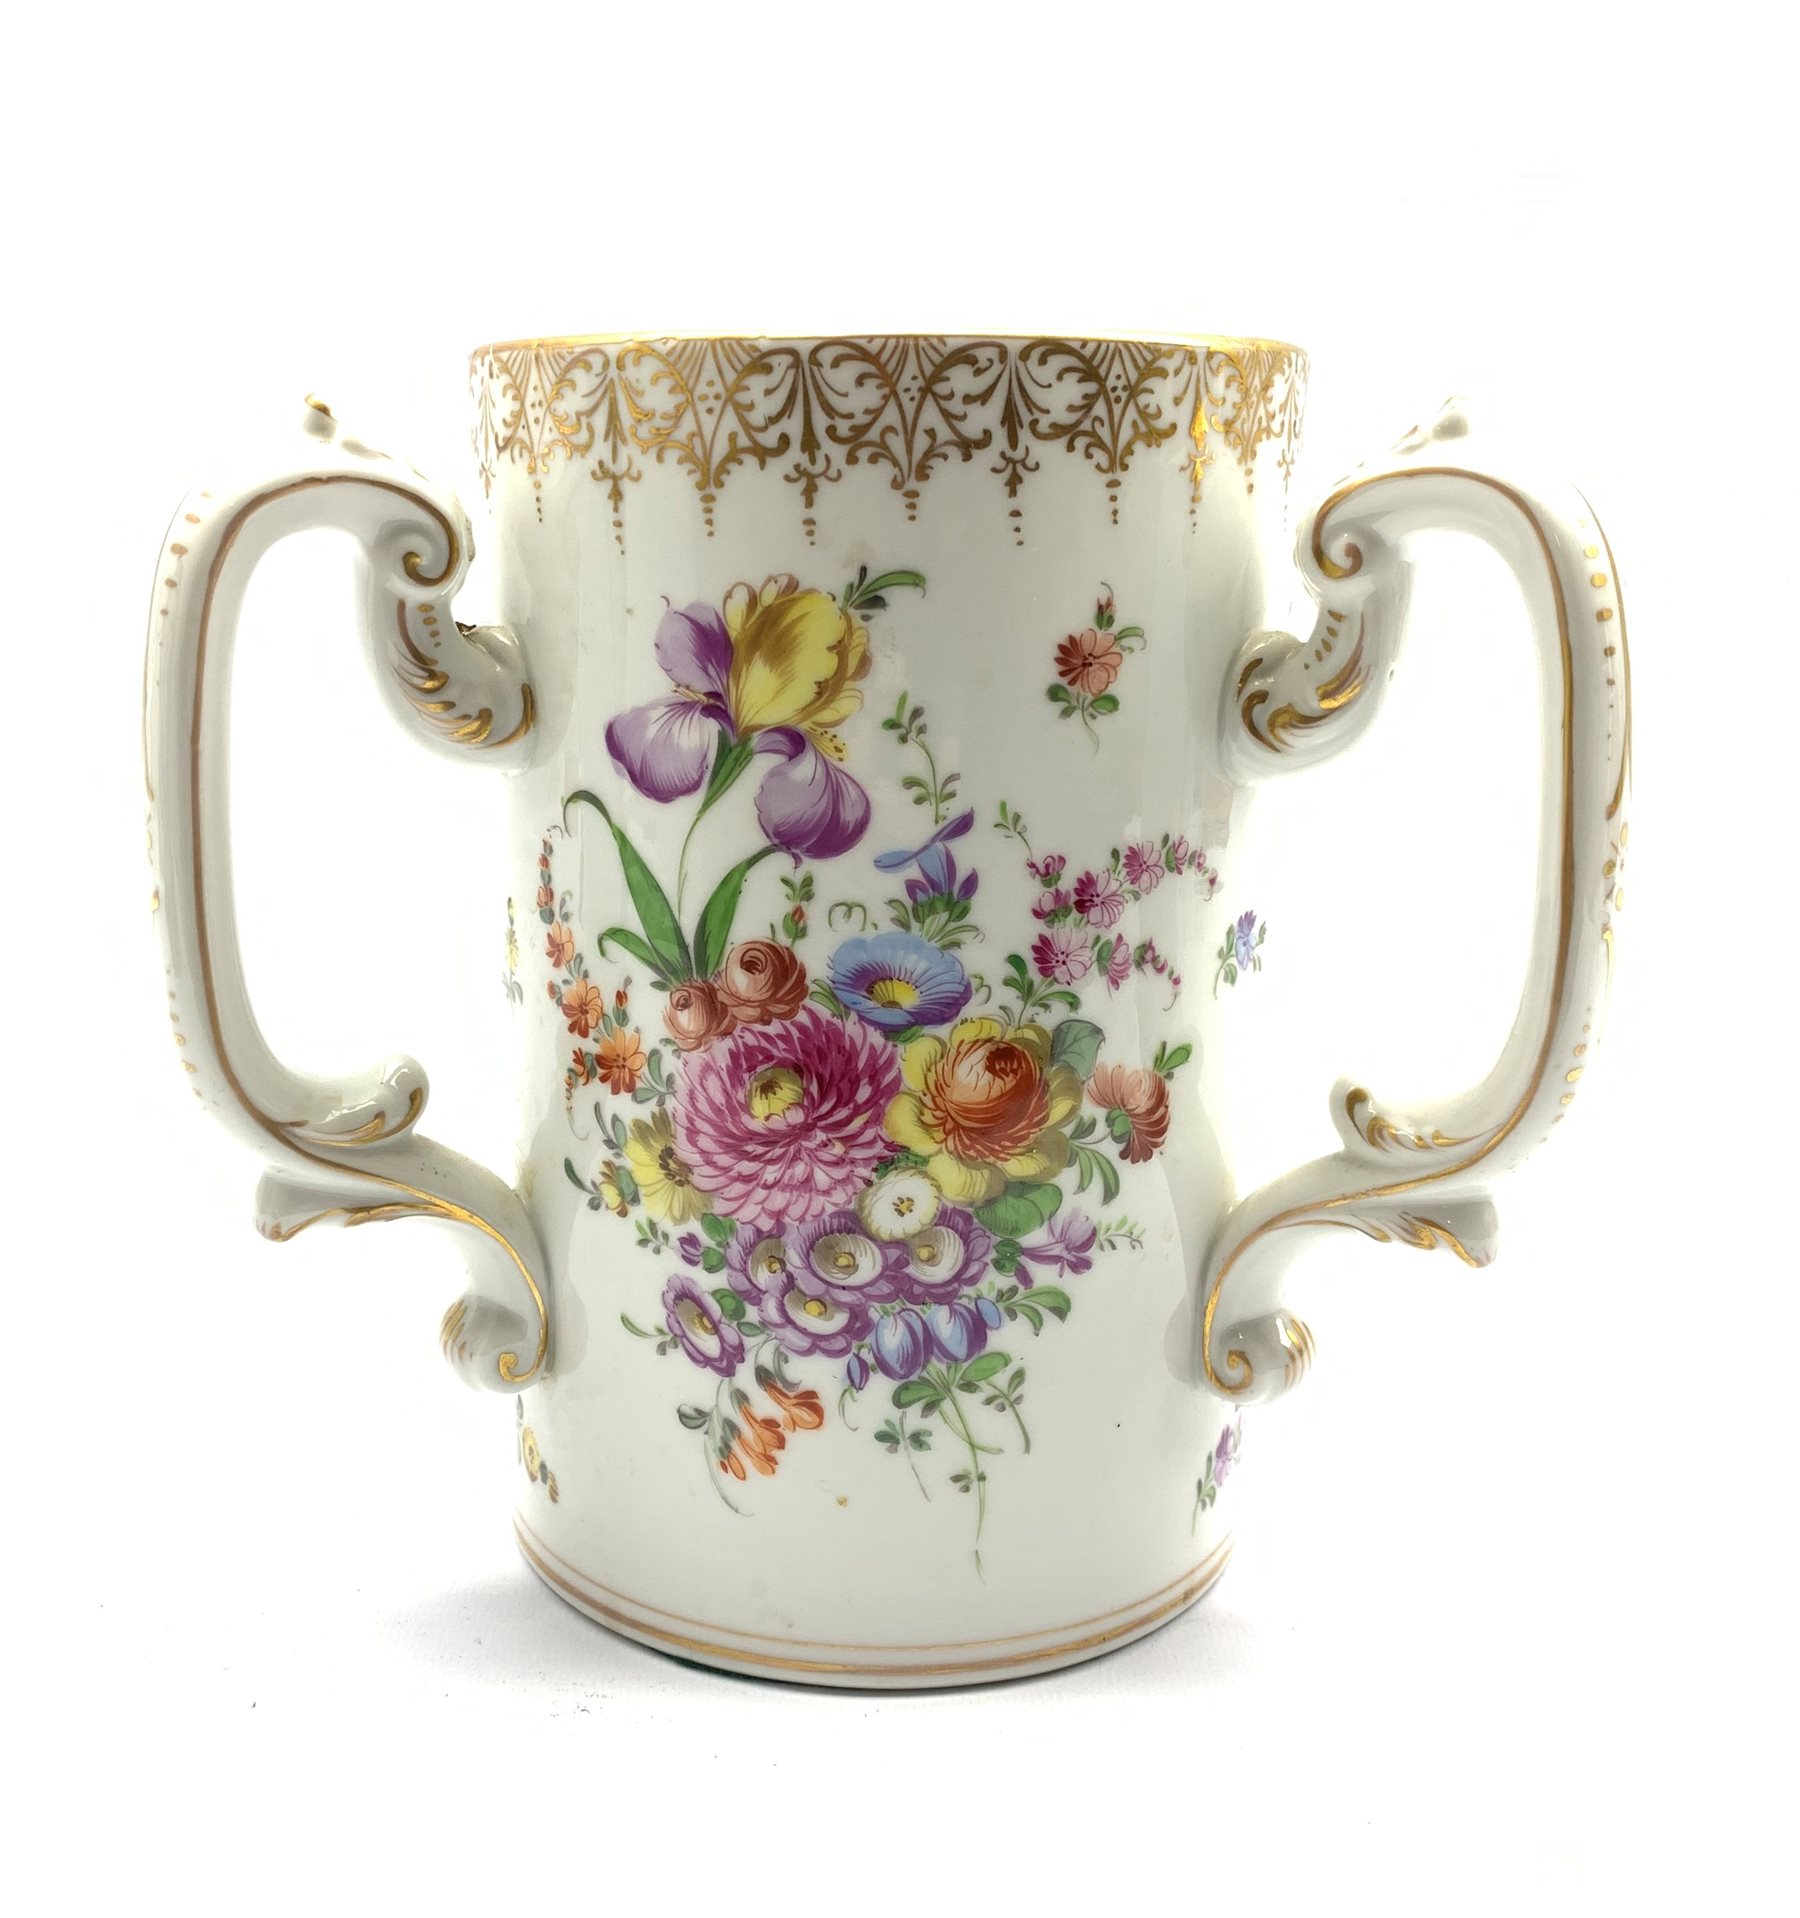 20th century Dresden Tyg hand-painted with floral sprays and gilt borders, H21cm